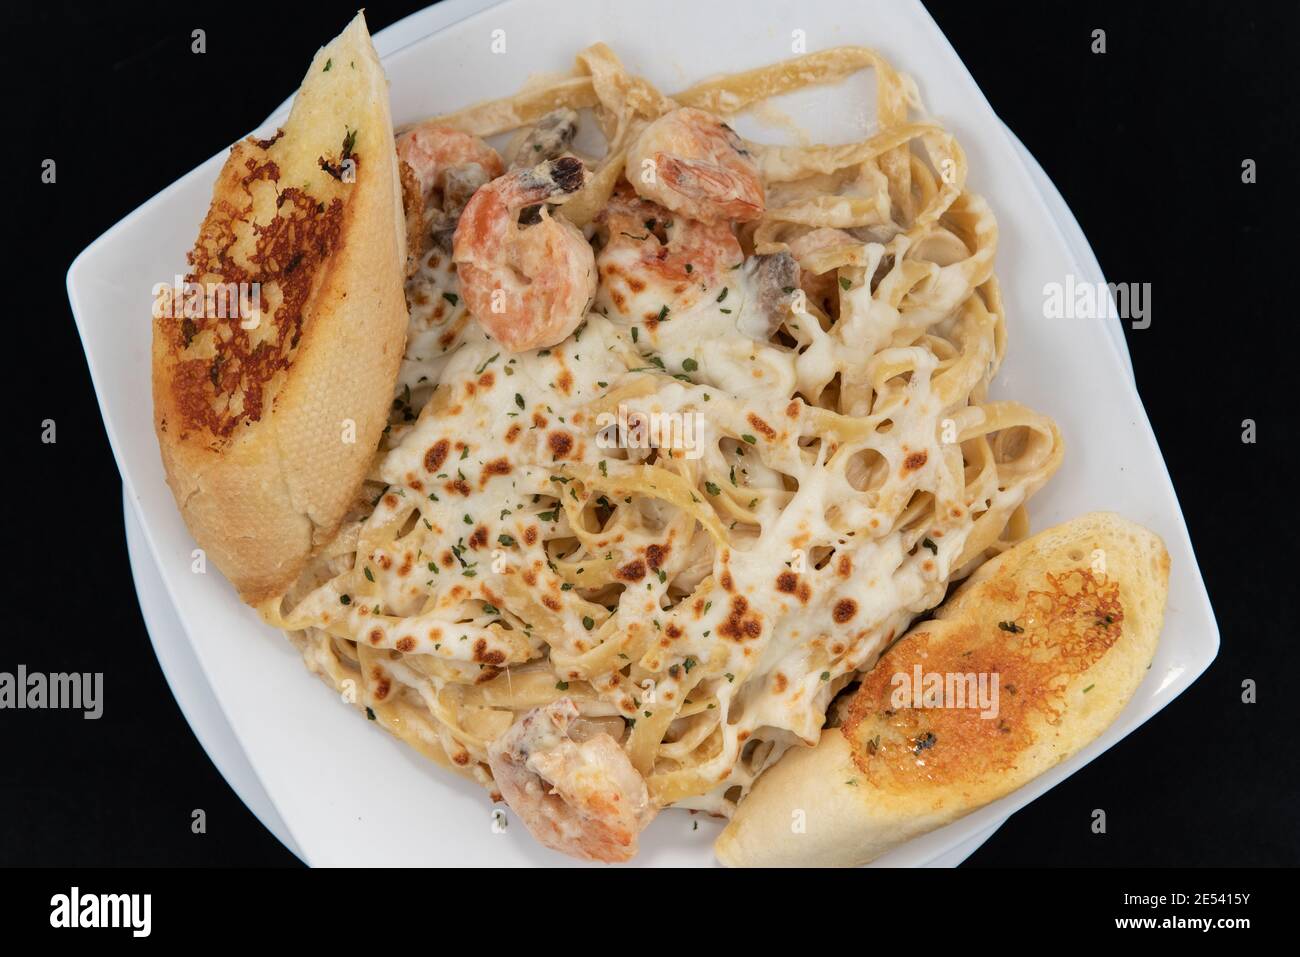 Overhead view of Mexican culinary favorite seafood pasta garnished with garlic bread on a plate. Stock Photo